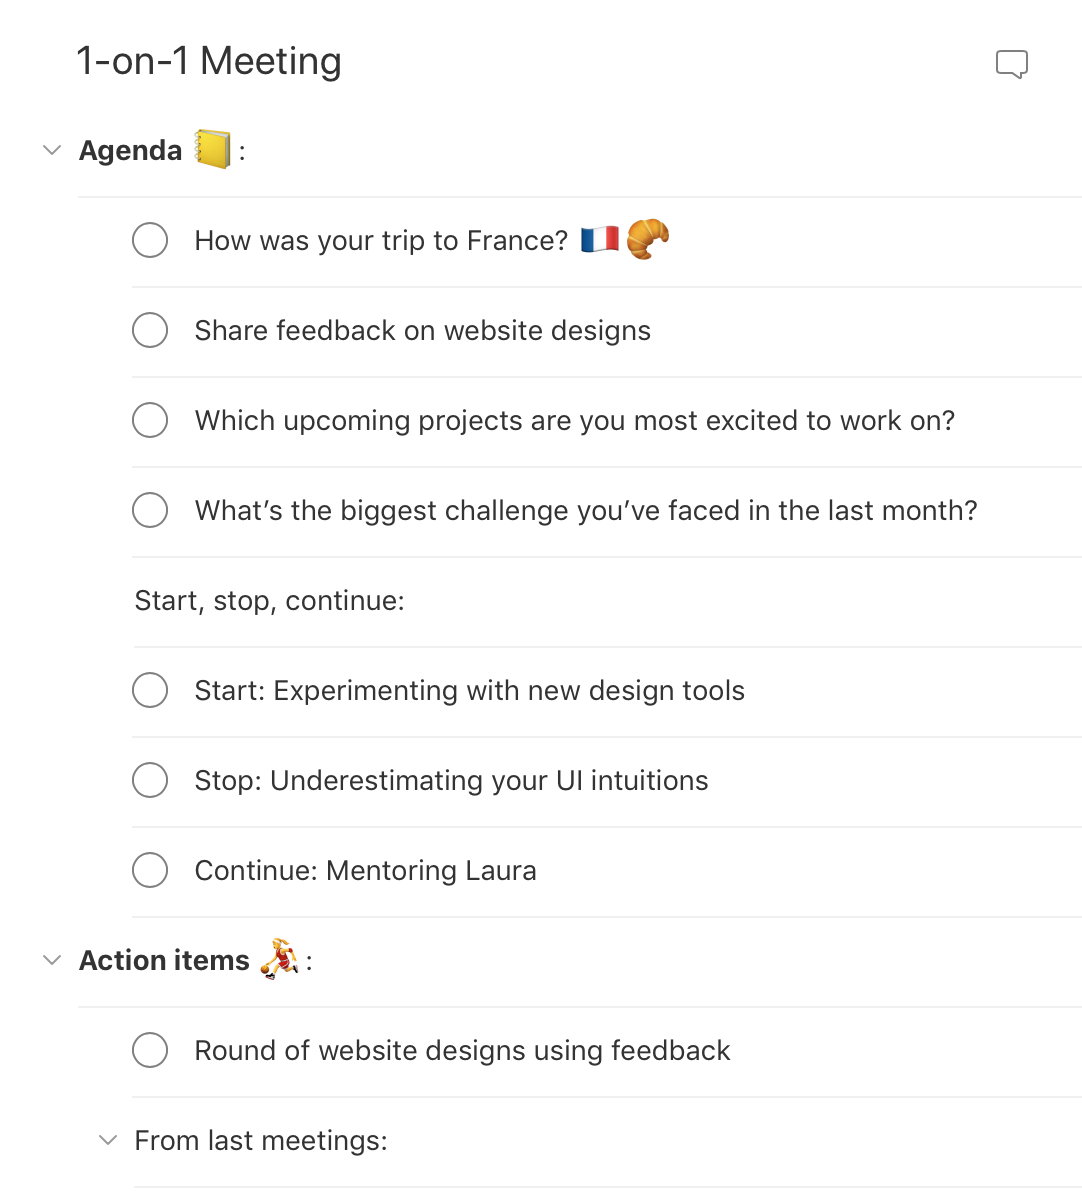 20-on-20 Meeting - Templates  Todoist Inside 1 On 1 Meeting Template